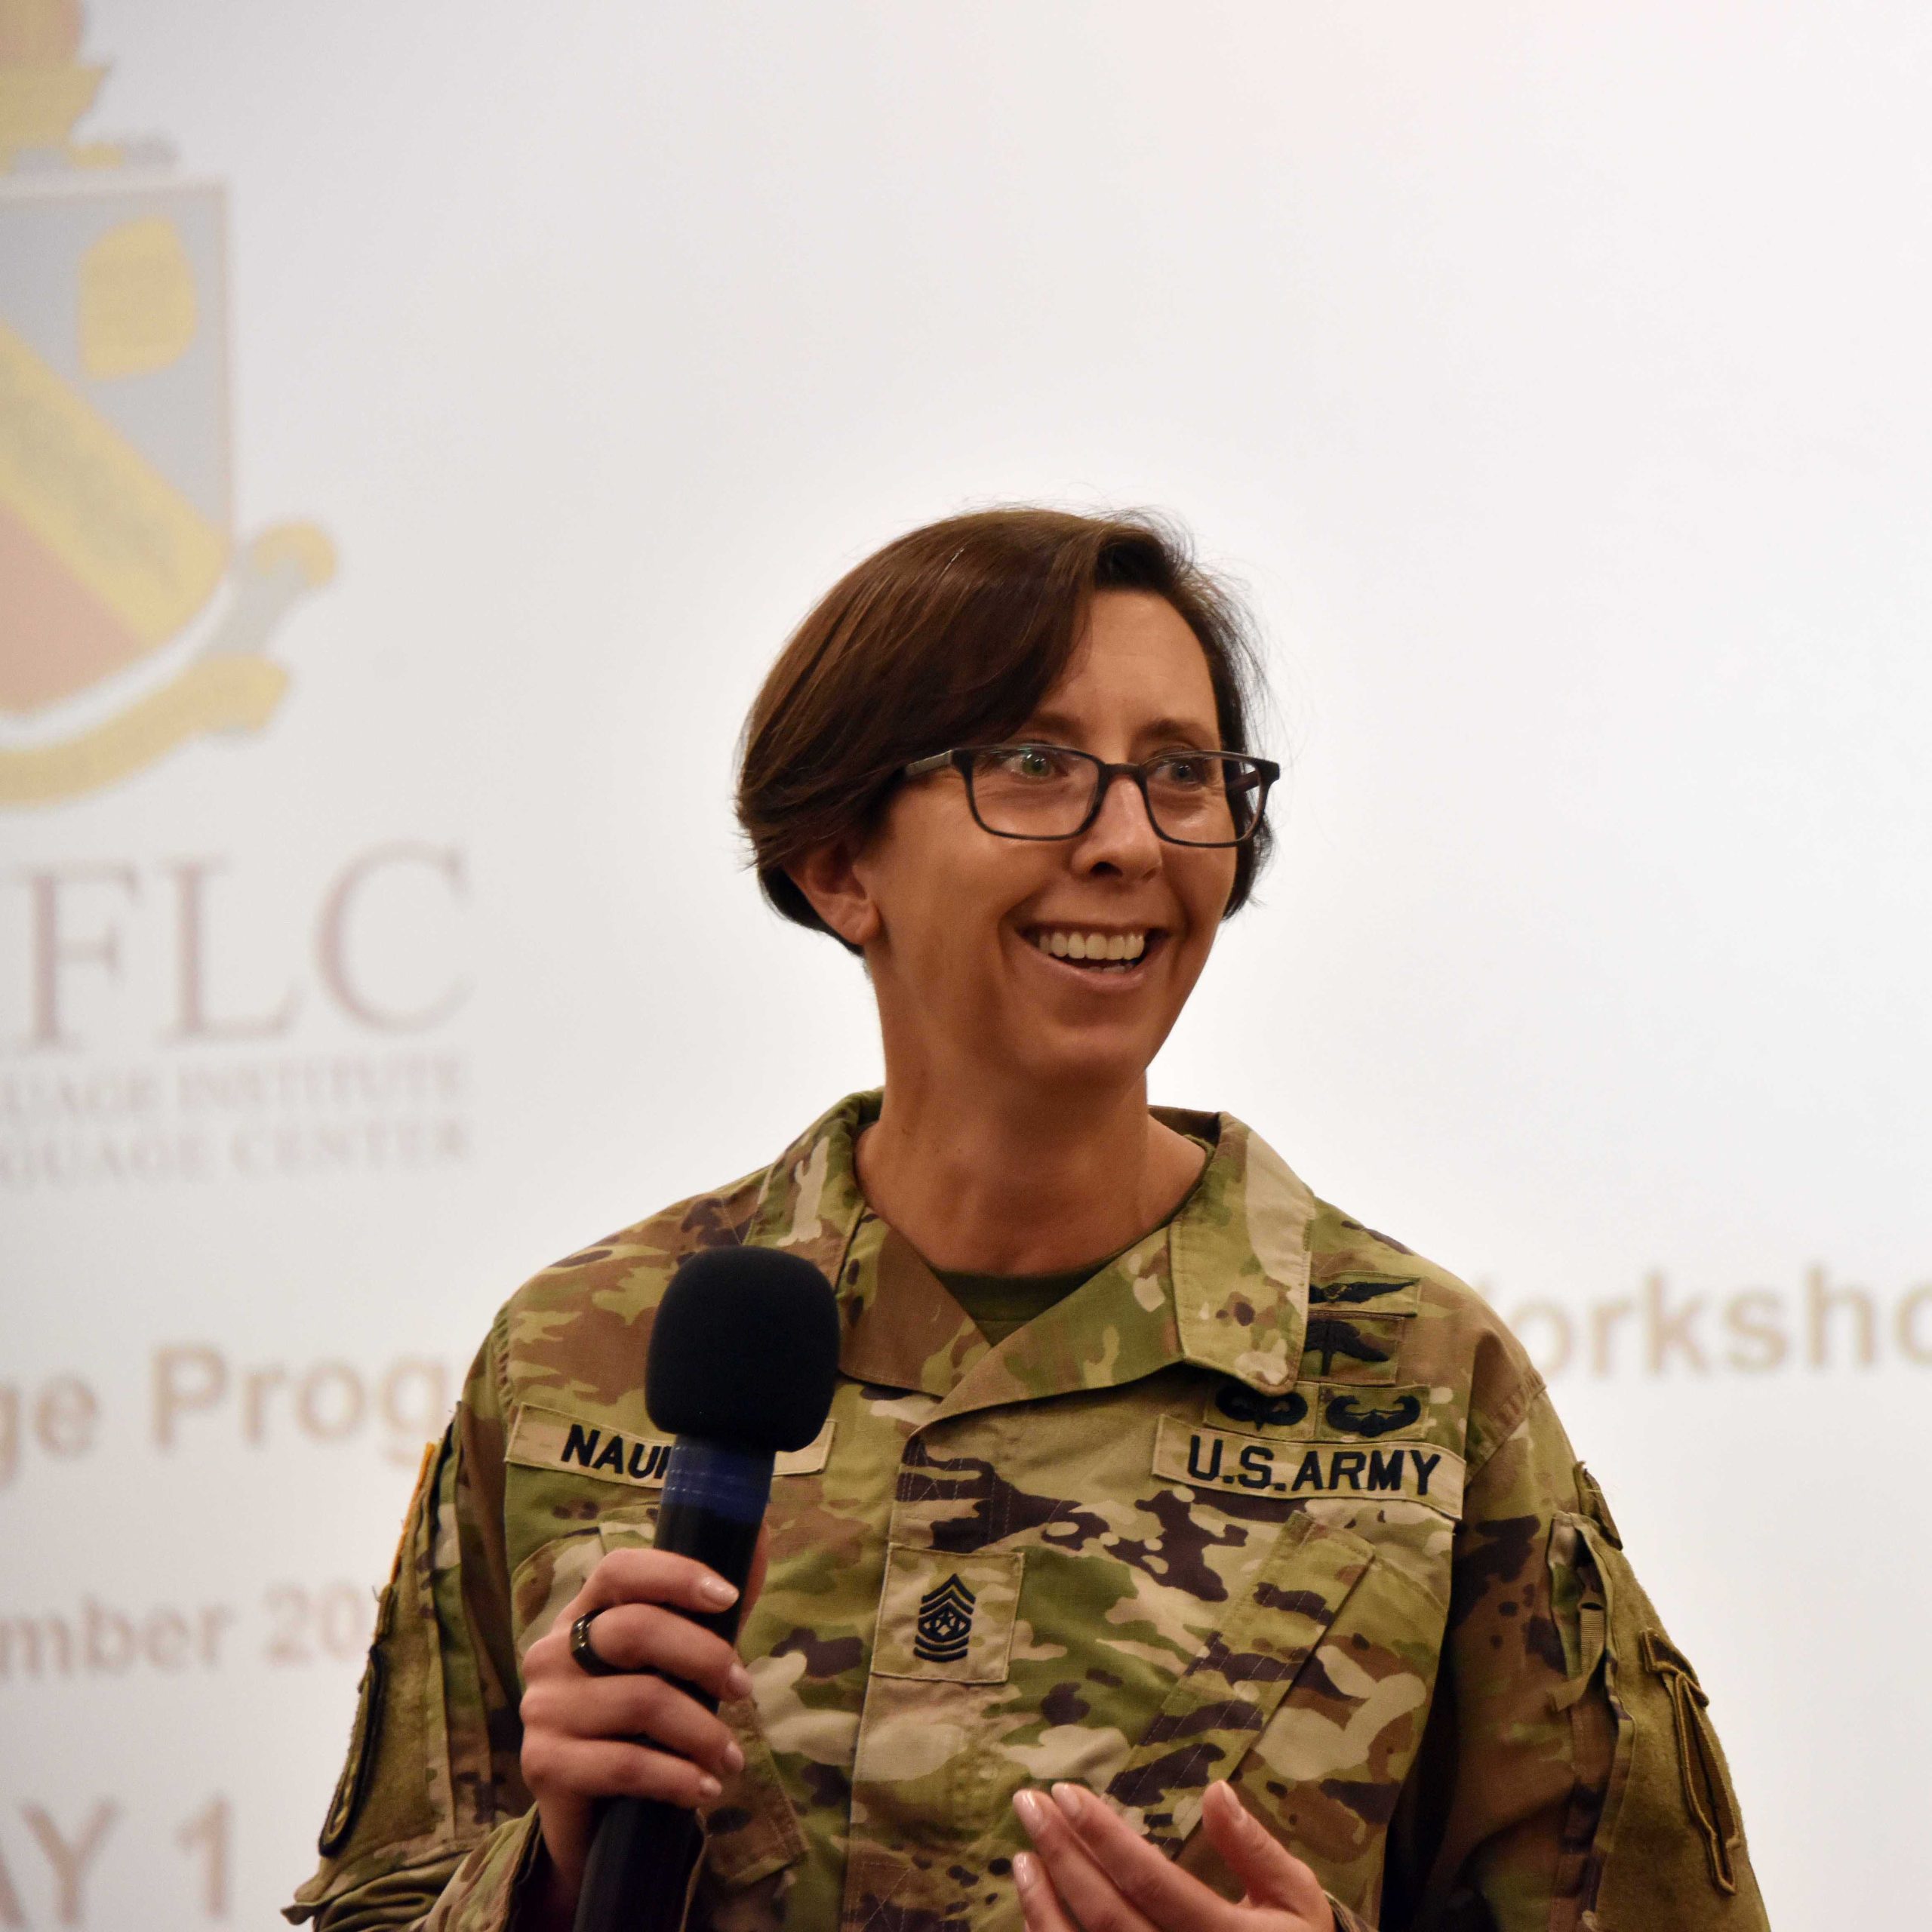 Language is a living thing – key to military readiness